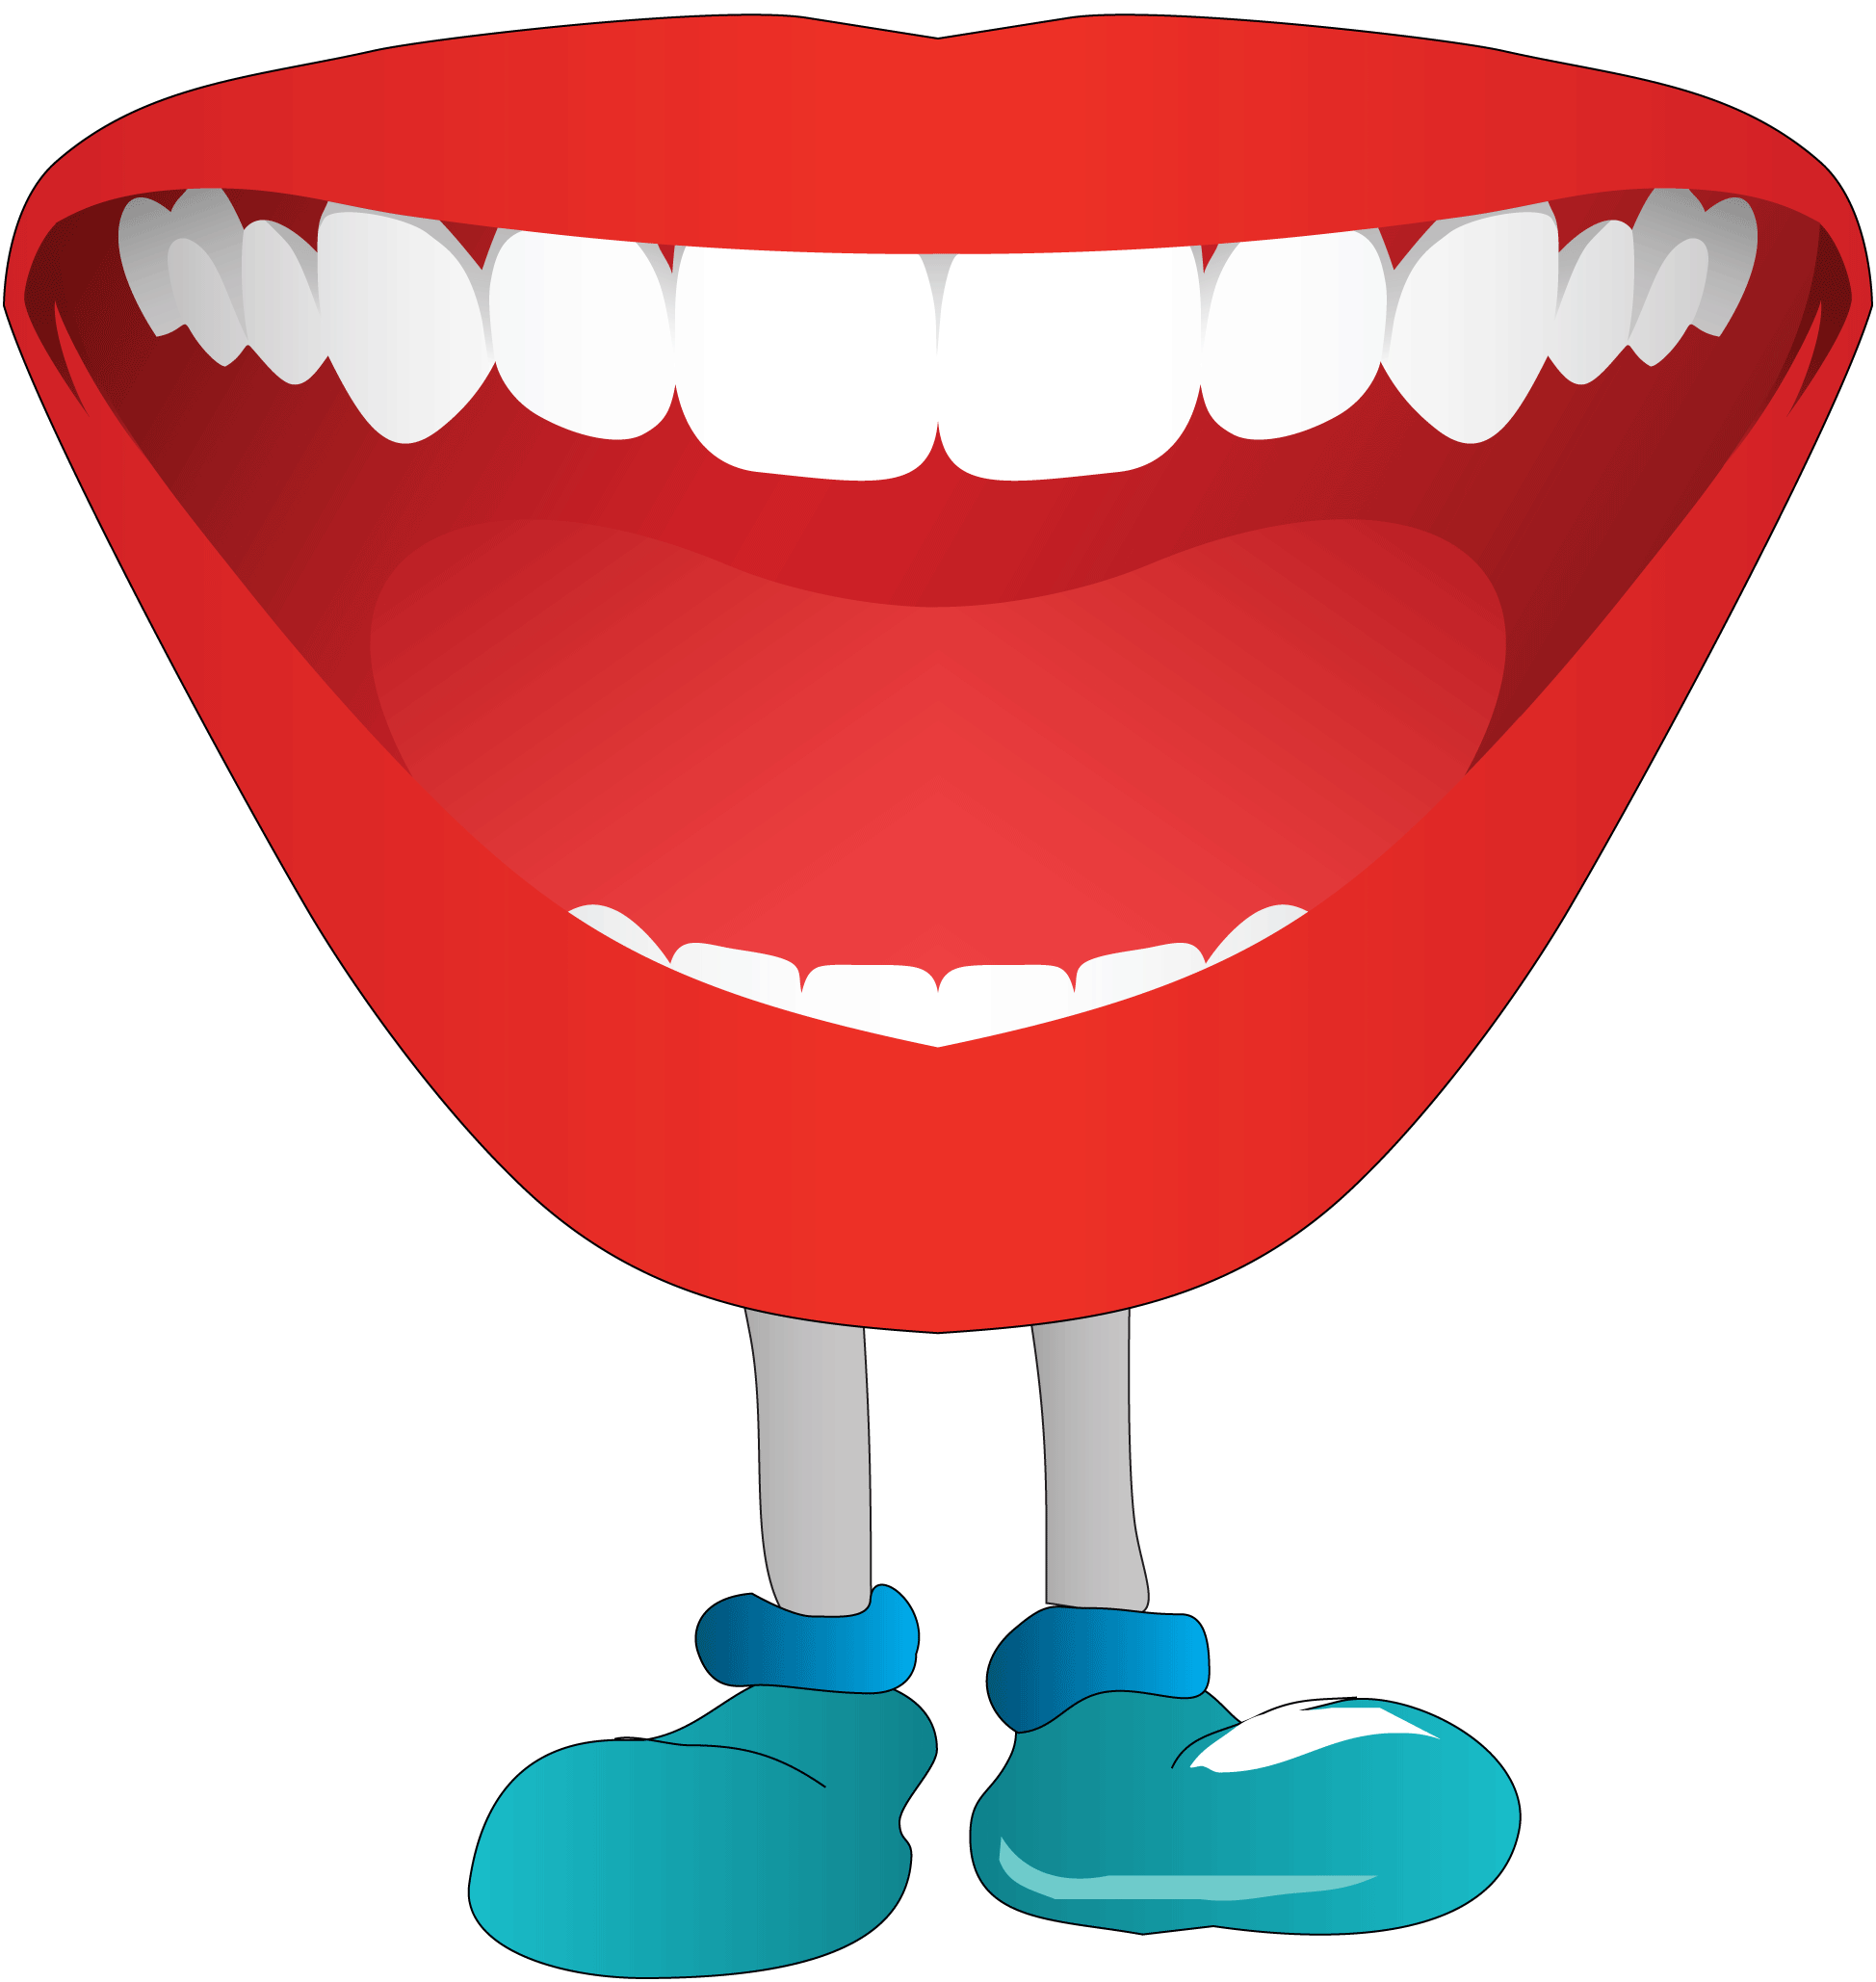 Images For Mouth Talking Cartoon